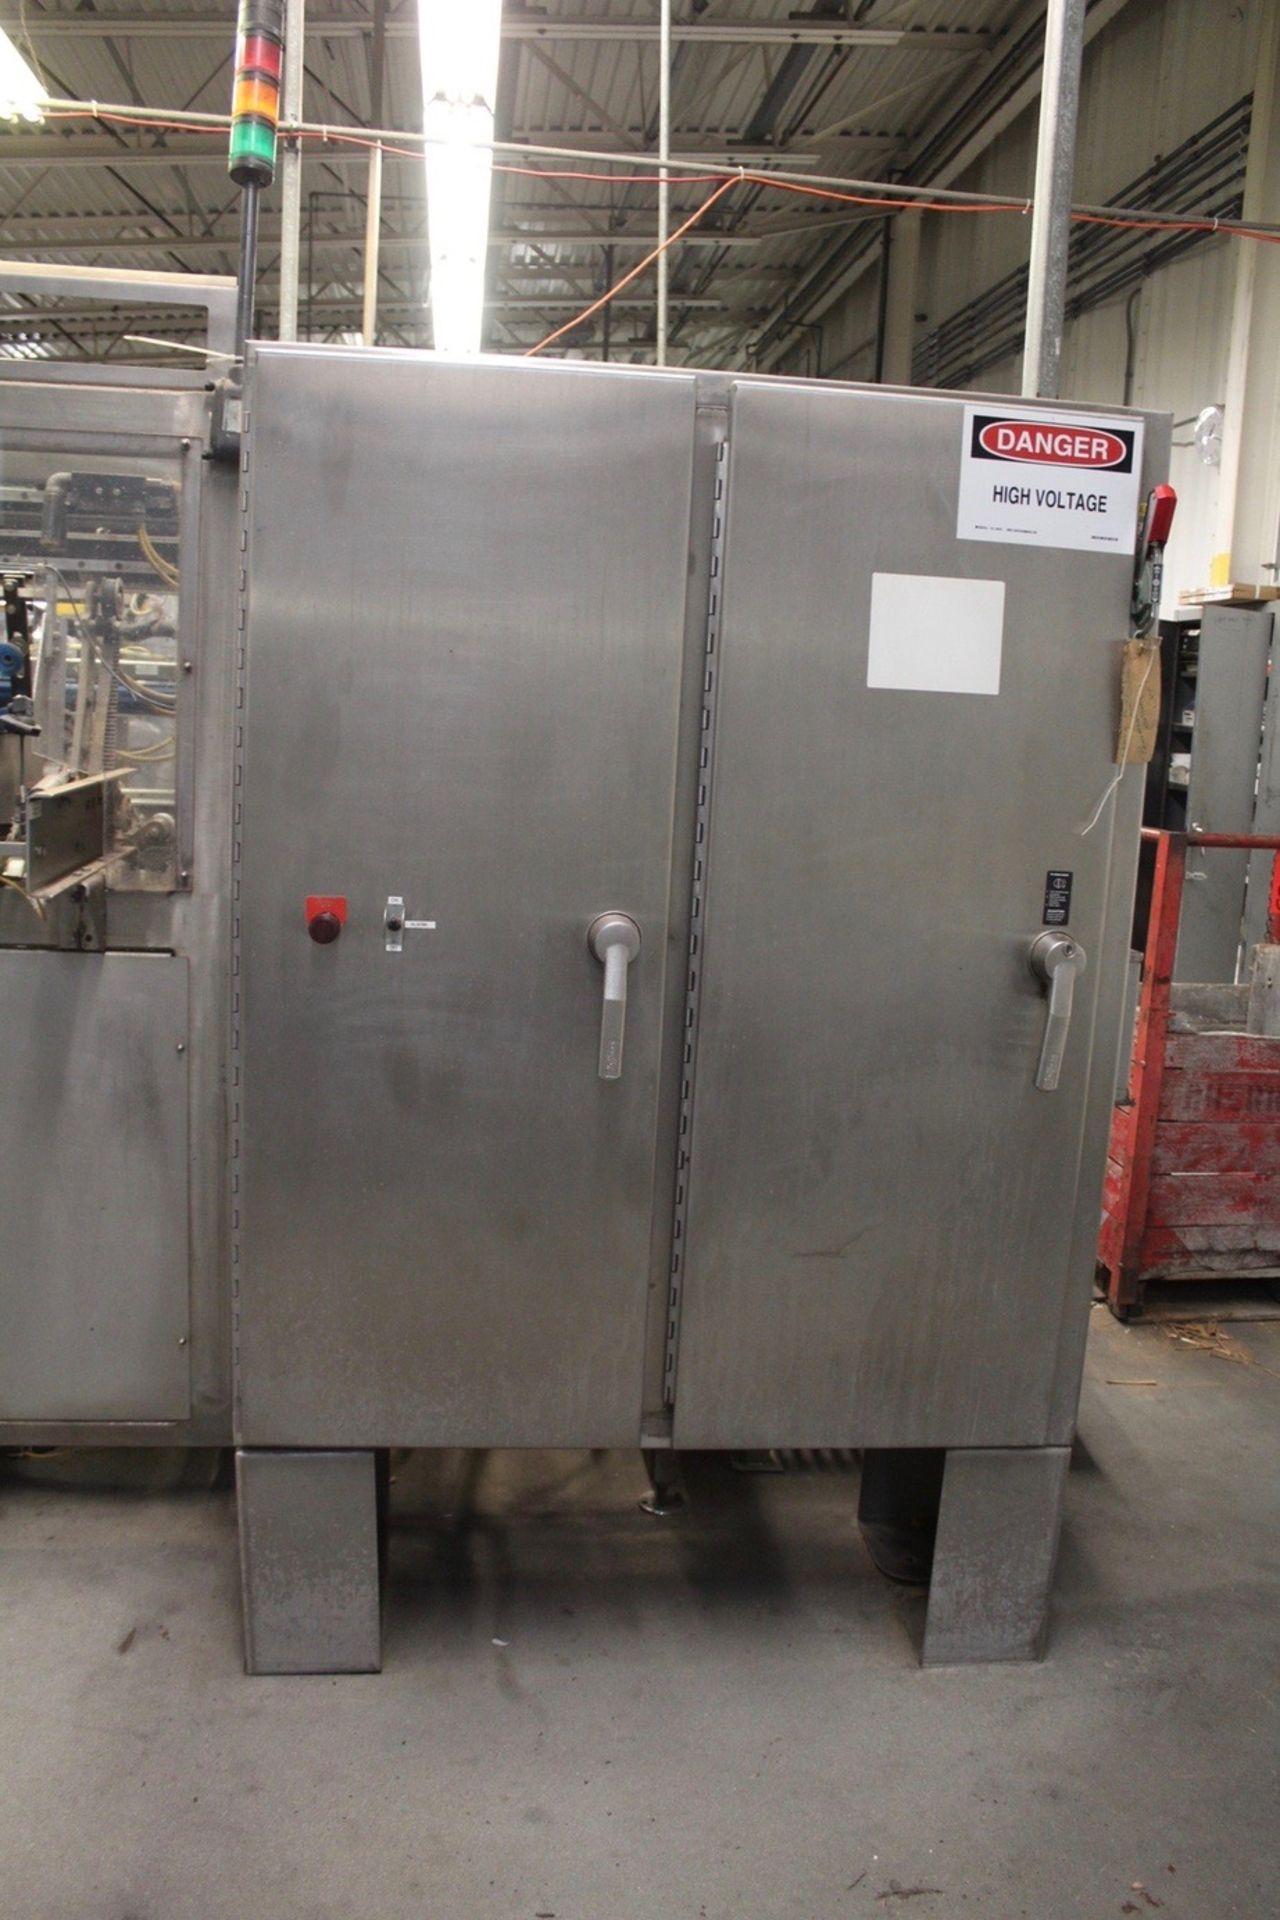 SWF 4 Oz. Case Packer, W/ Box Erector, Stager & Controls | Subject to Bulk 149B | Rigging: $4200 - Image 8 of 8